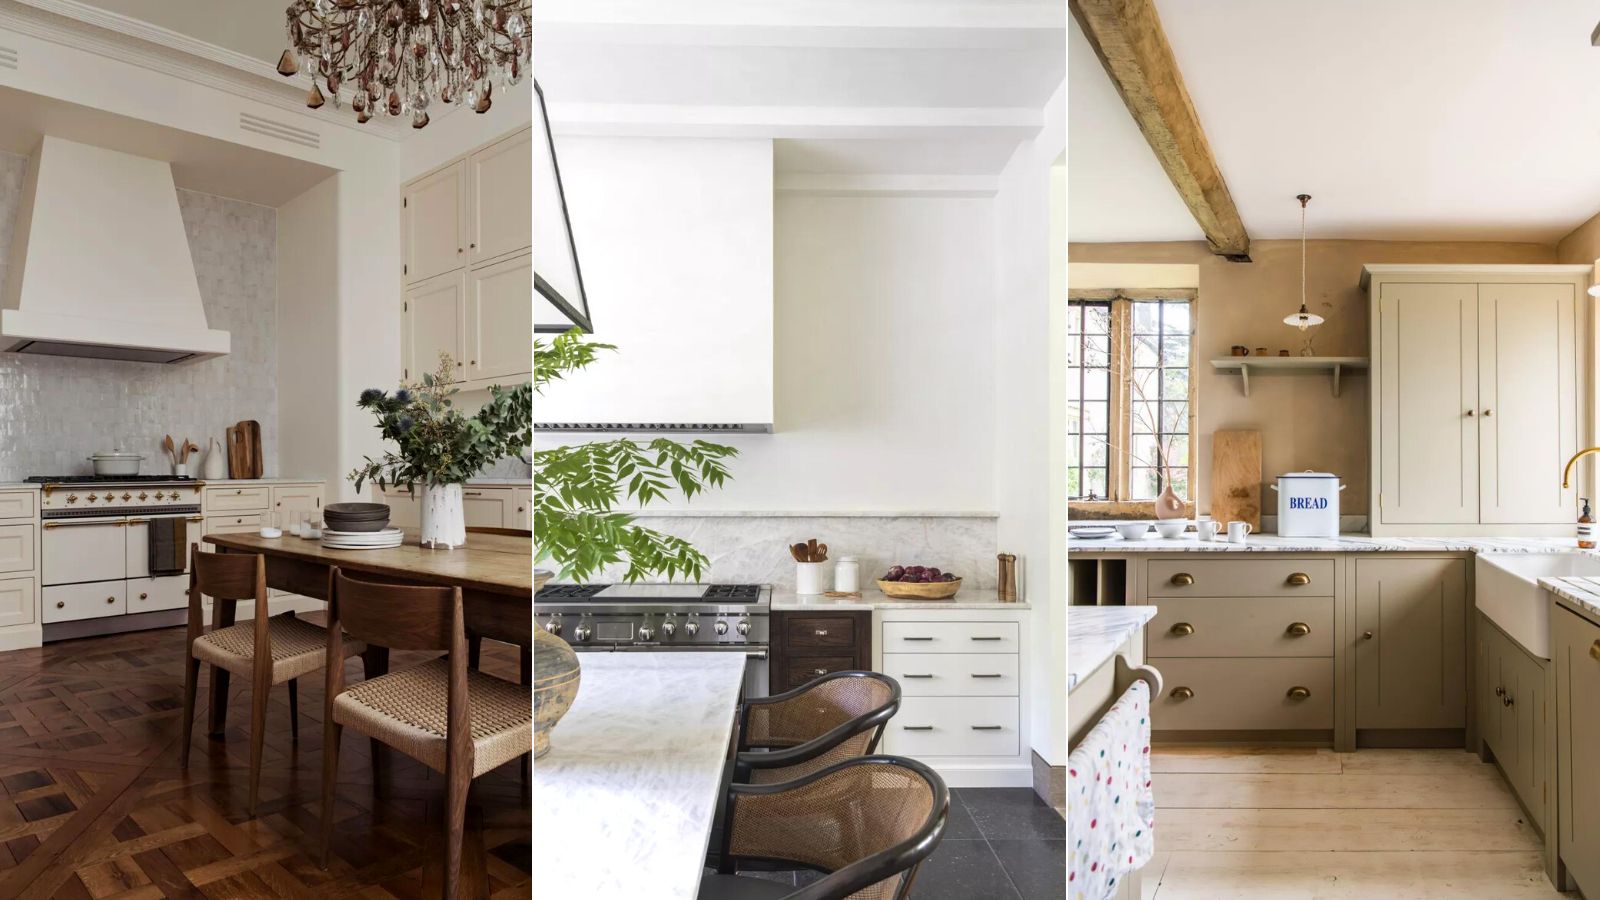 12 Wooden Kitchen Ideas That Prove the Material's Versatility